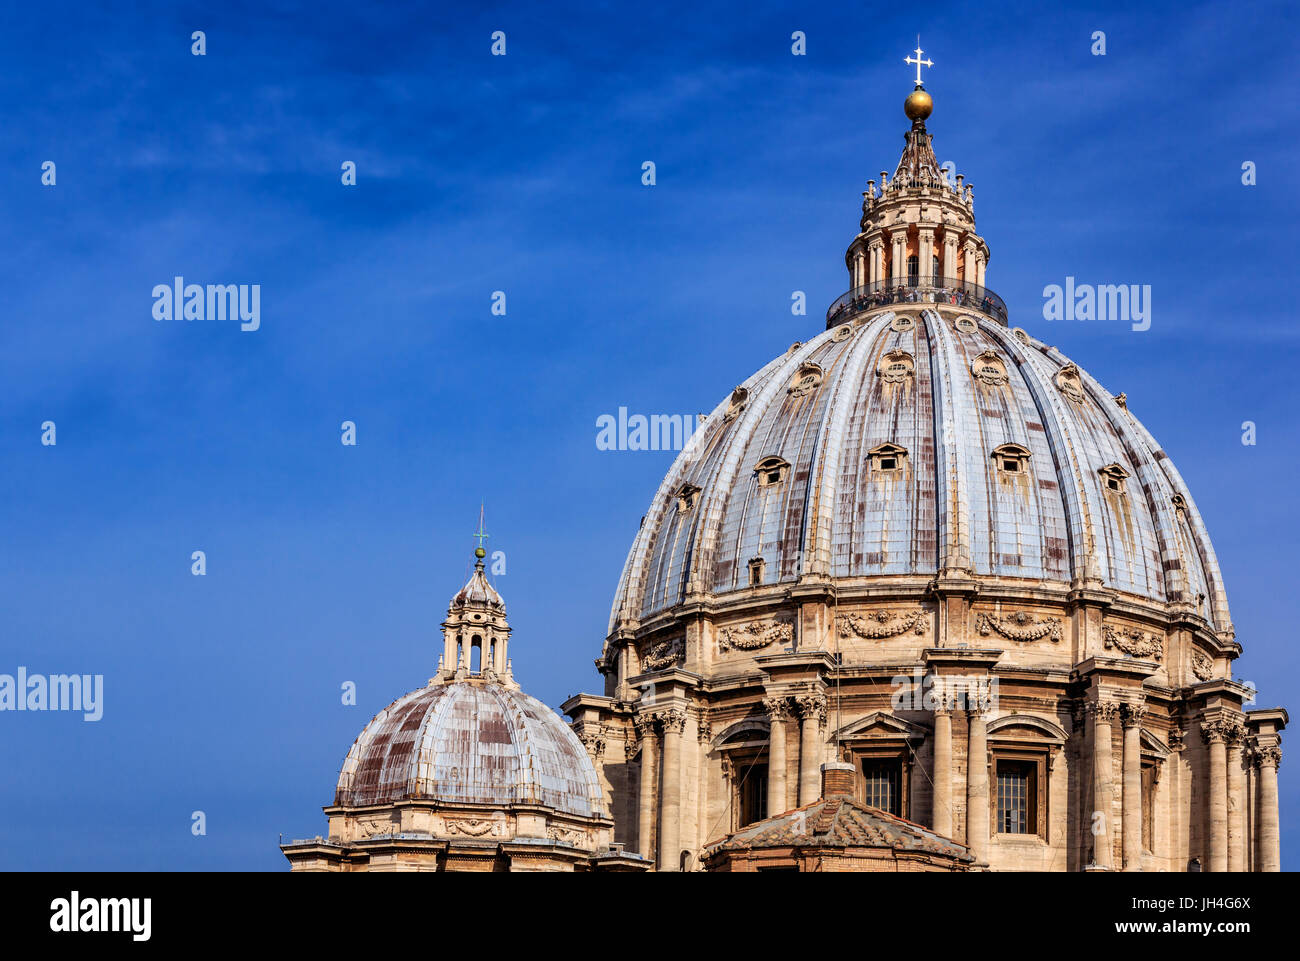 The Cupola, St Peter's Basilica, Vatican, Rome, Italy Stock Photo